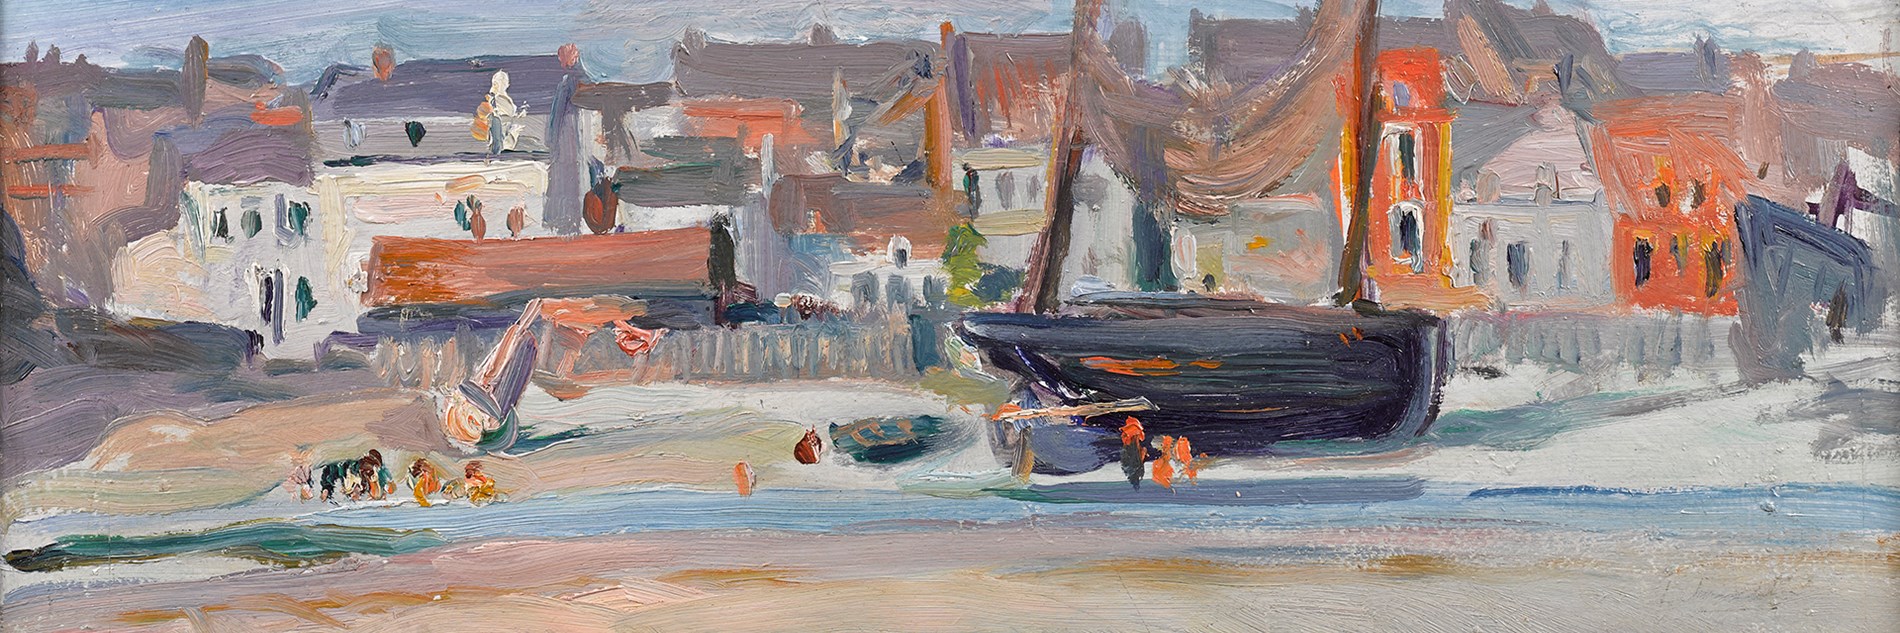 A painting of a coastline in shades of blue, yellow, cream and orange,  On the beach there is a boat, and behind the coastline there is a row of buildings. 